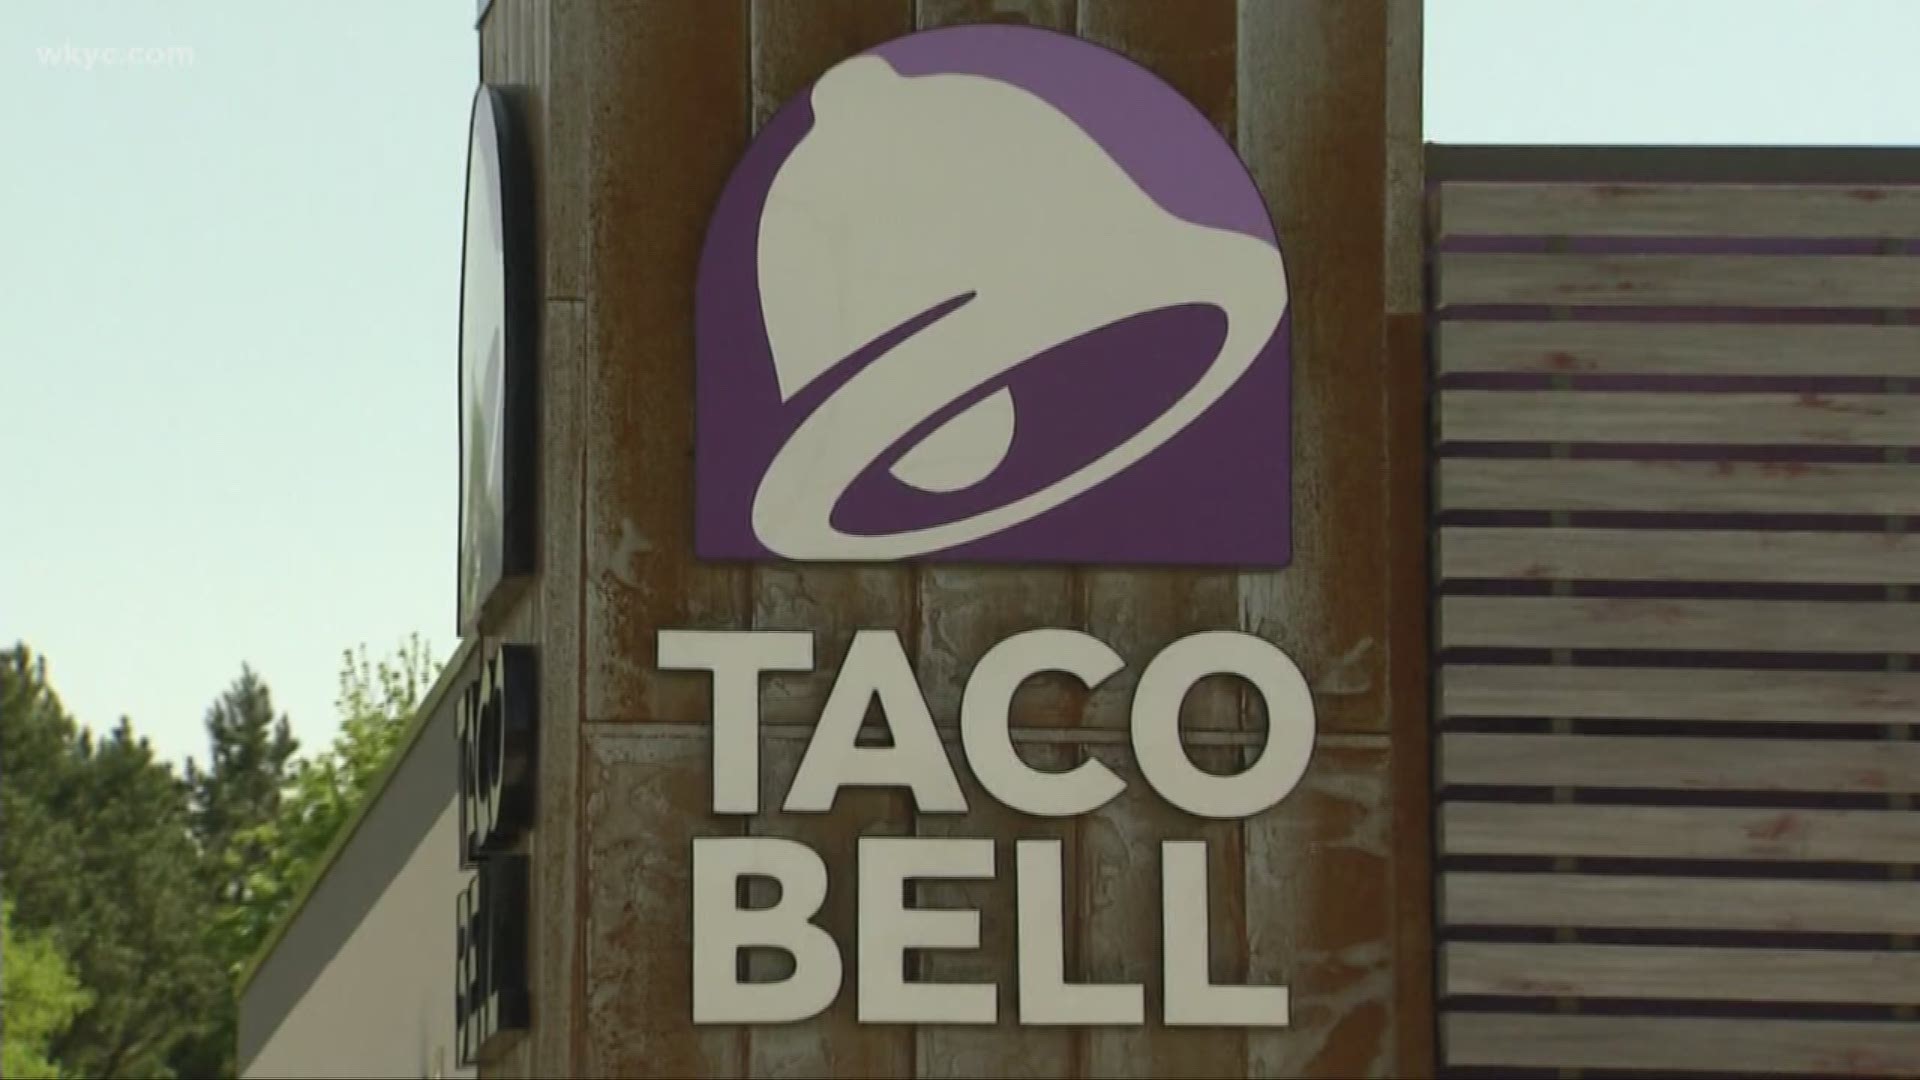 Sept. 11, 2019: Taco Bell is launching a permanent section of its meat-free offerings at its restaurants across the country this week. Among the mnu items include a black bean Crunchwrap Supreme and a black bean Quesarito.